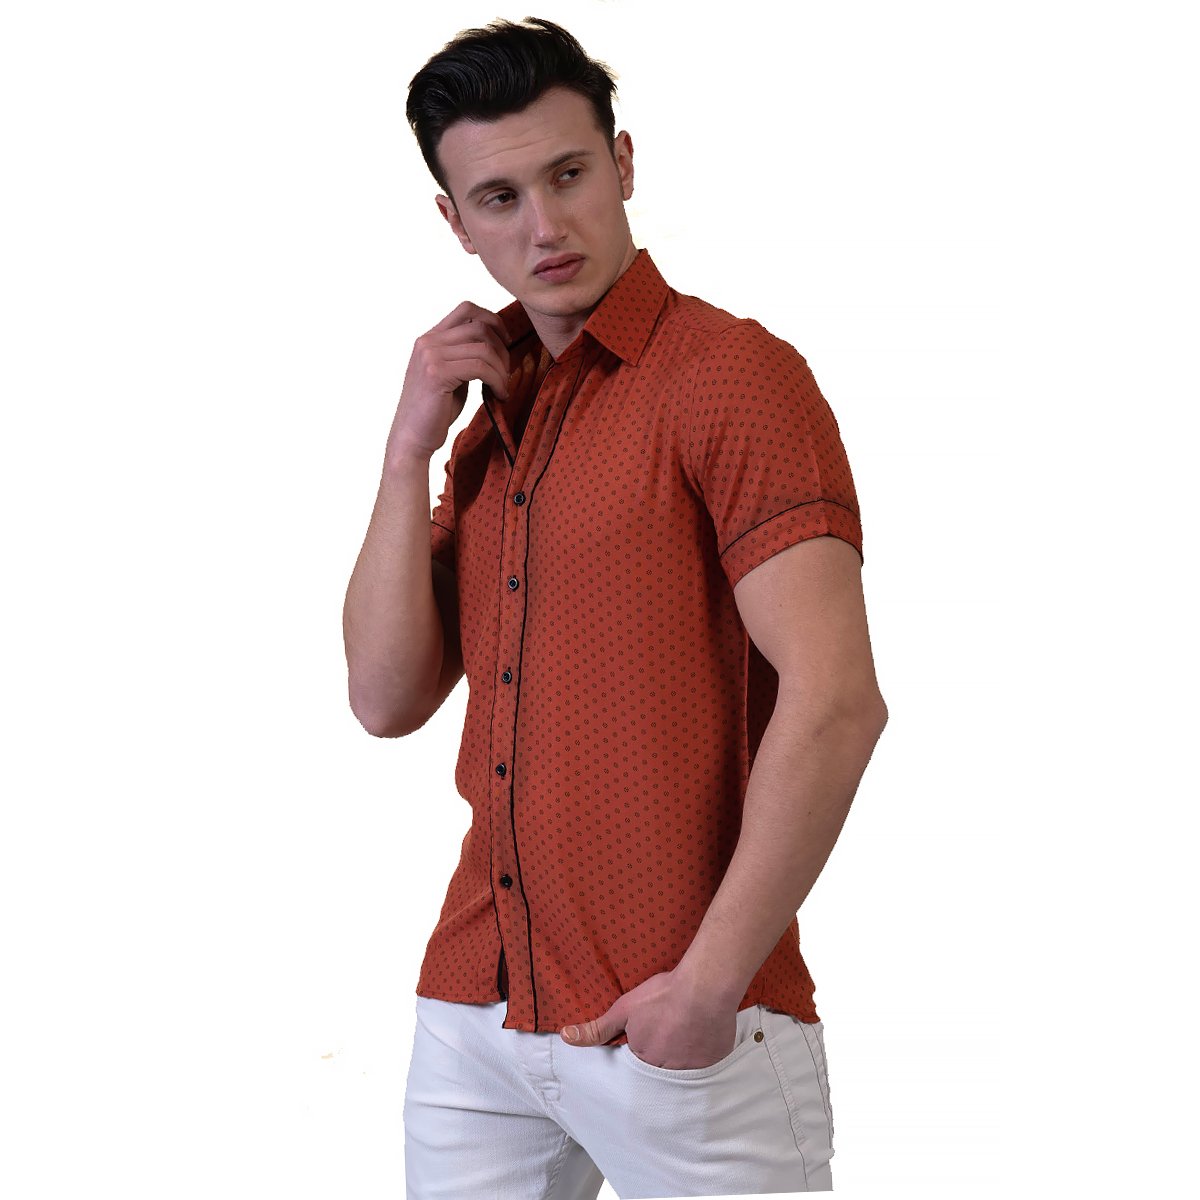 Picture of a Premium Men's Short Sleeve Button Up Shirt in Red side view